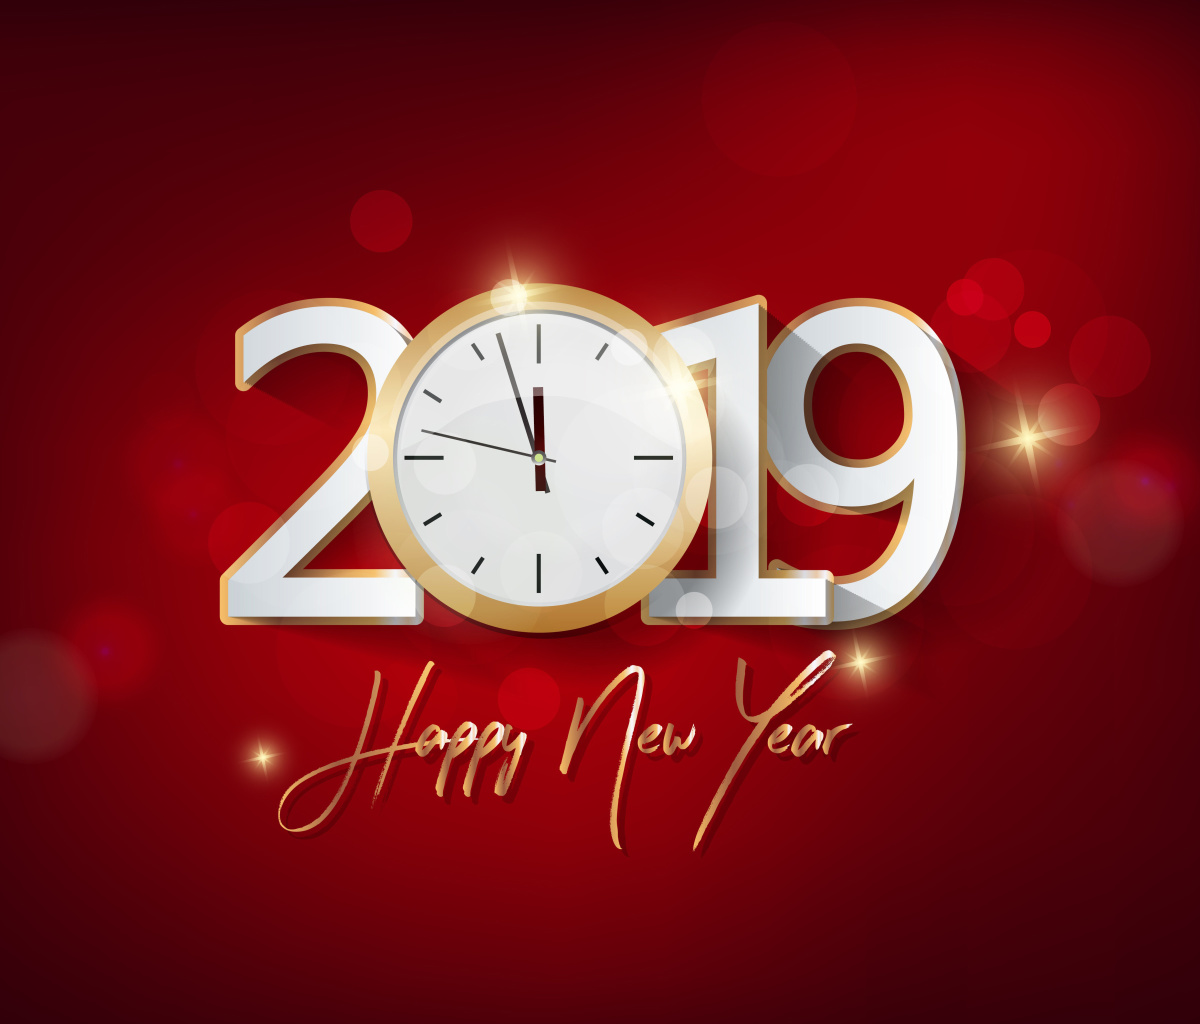 2019 New Year Festive Party wallpaper 1200x1024